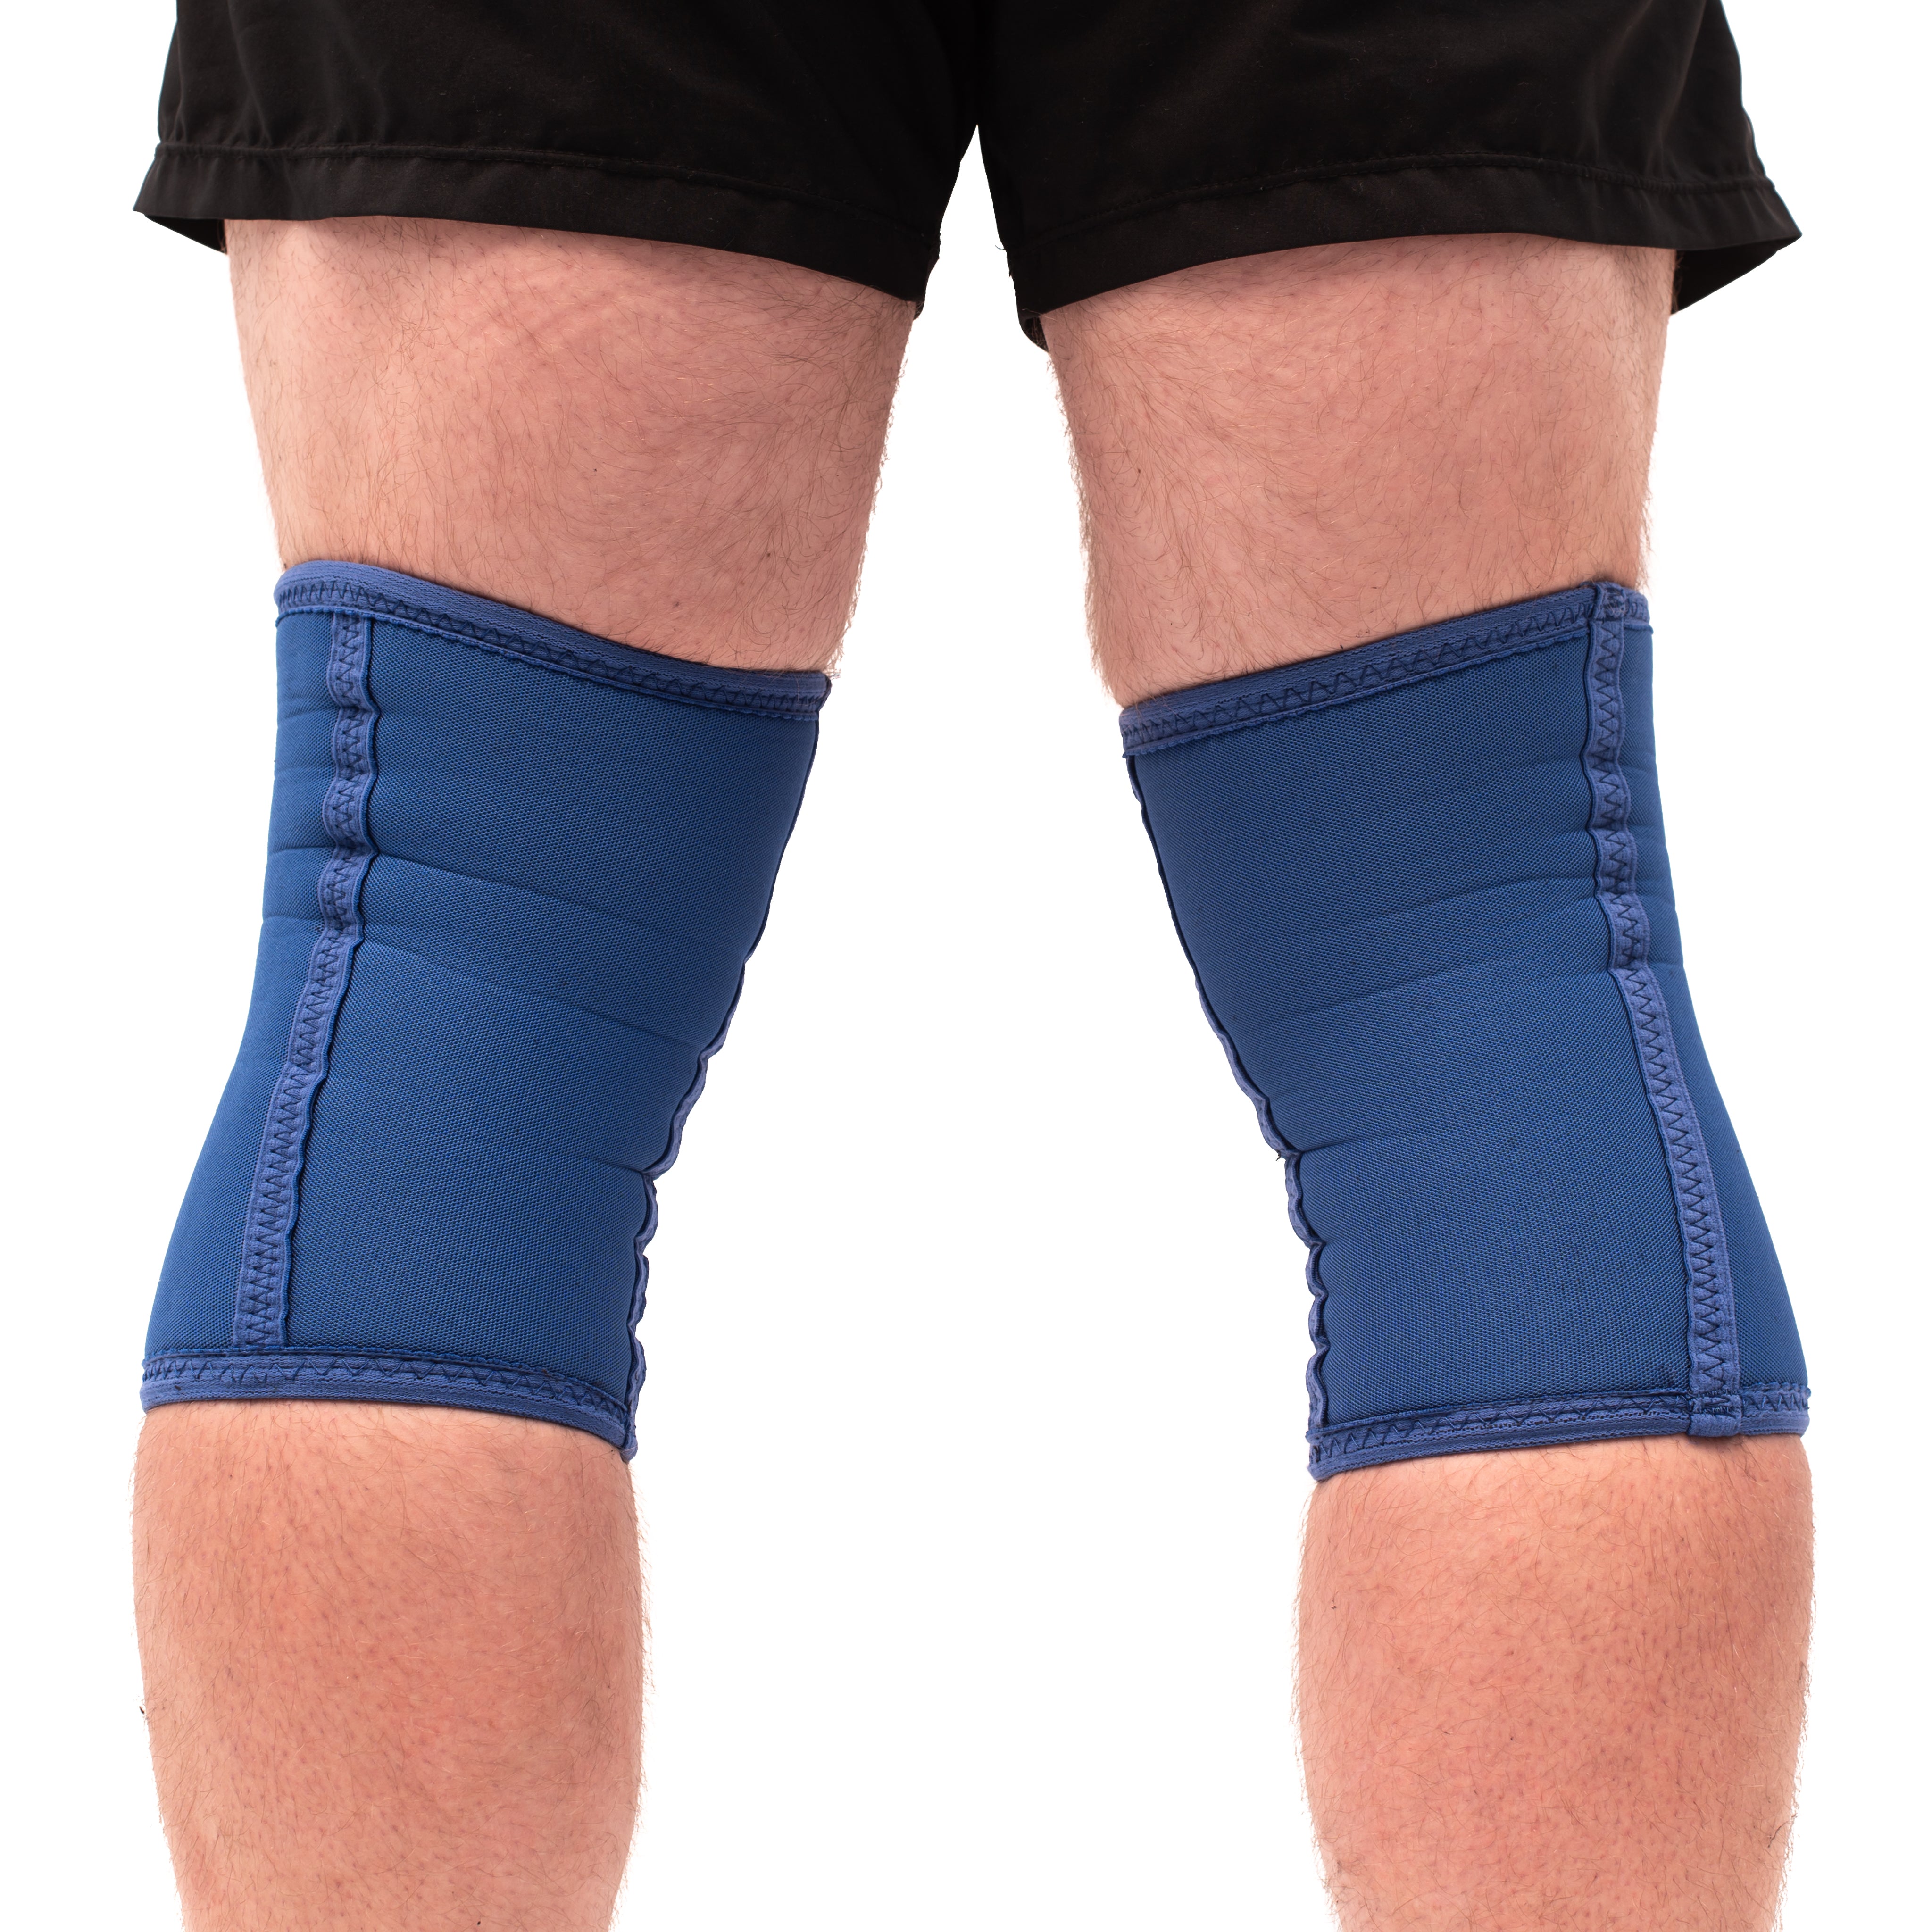 CONE Royal Blue Knee Sleeves - USPA & IPF Approved